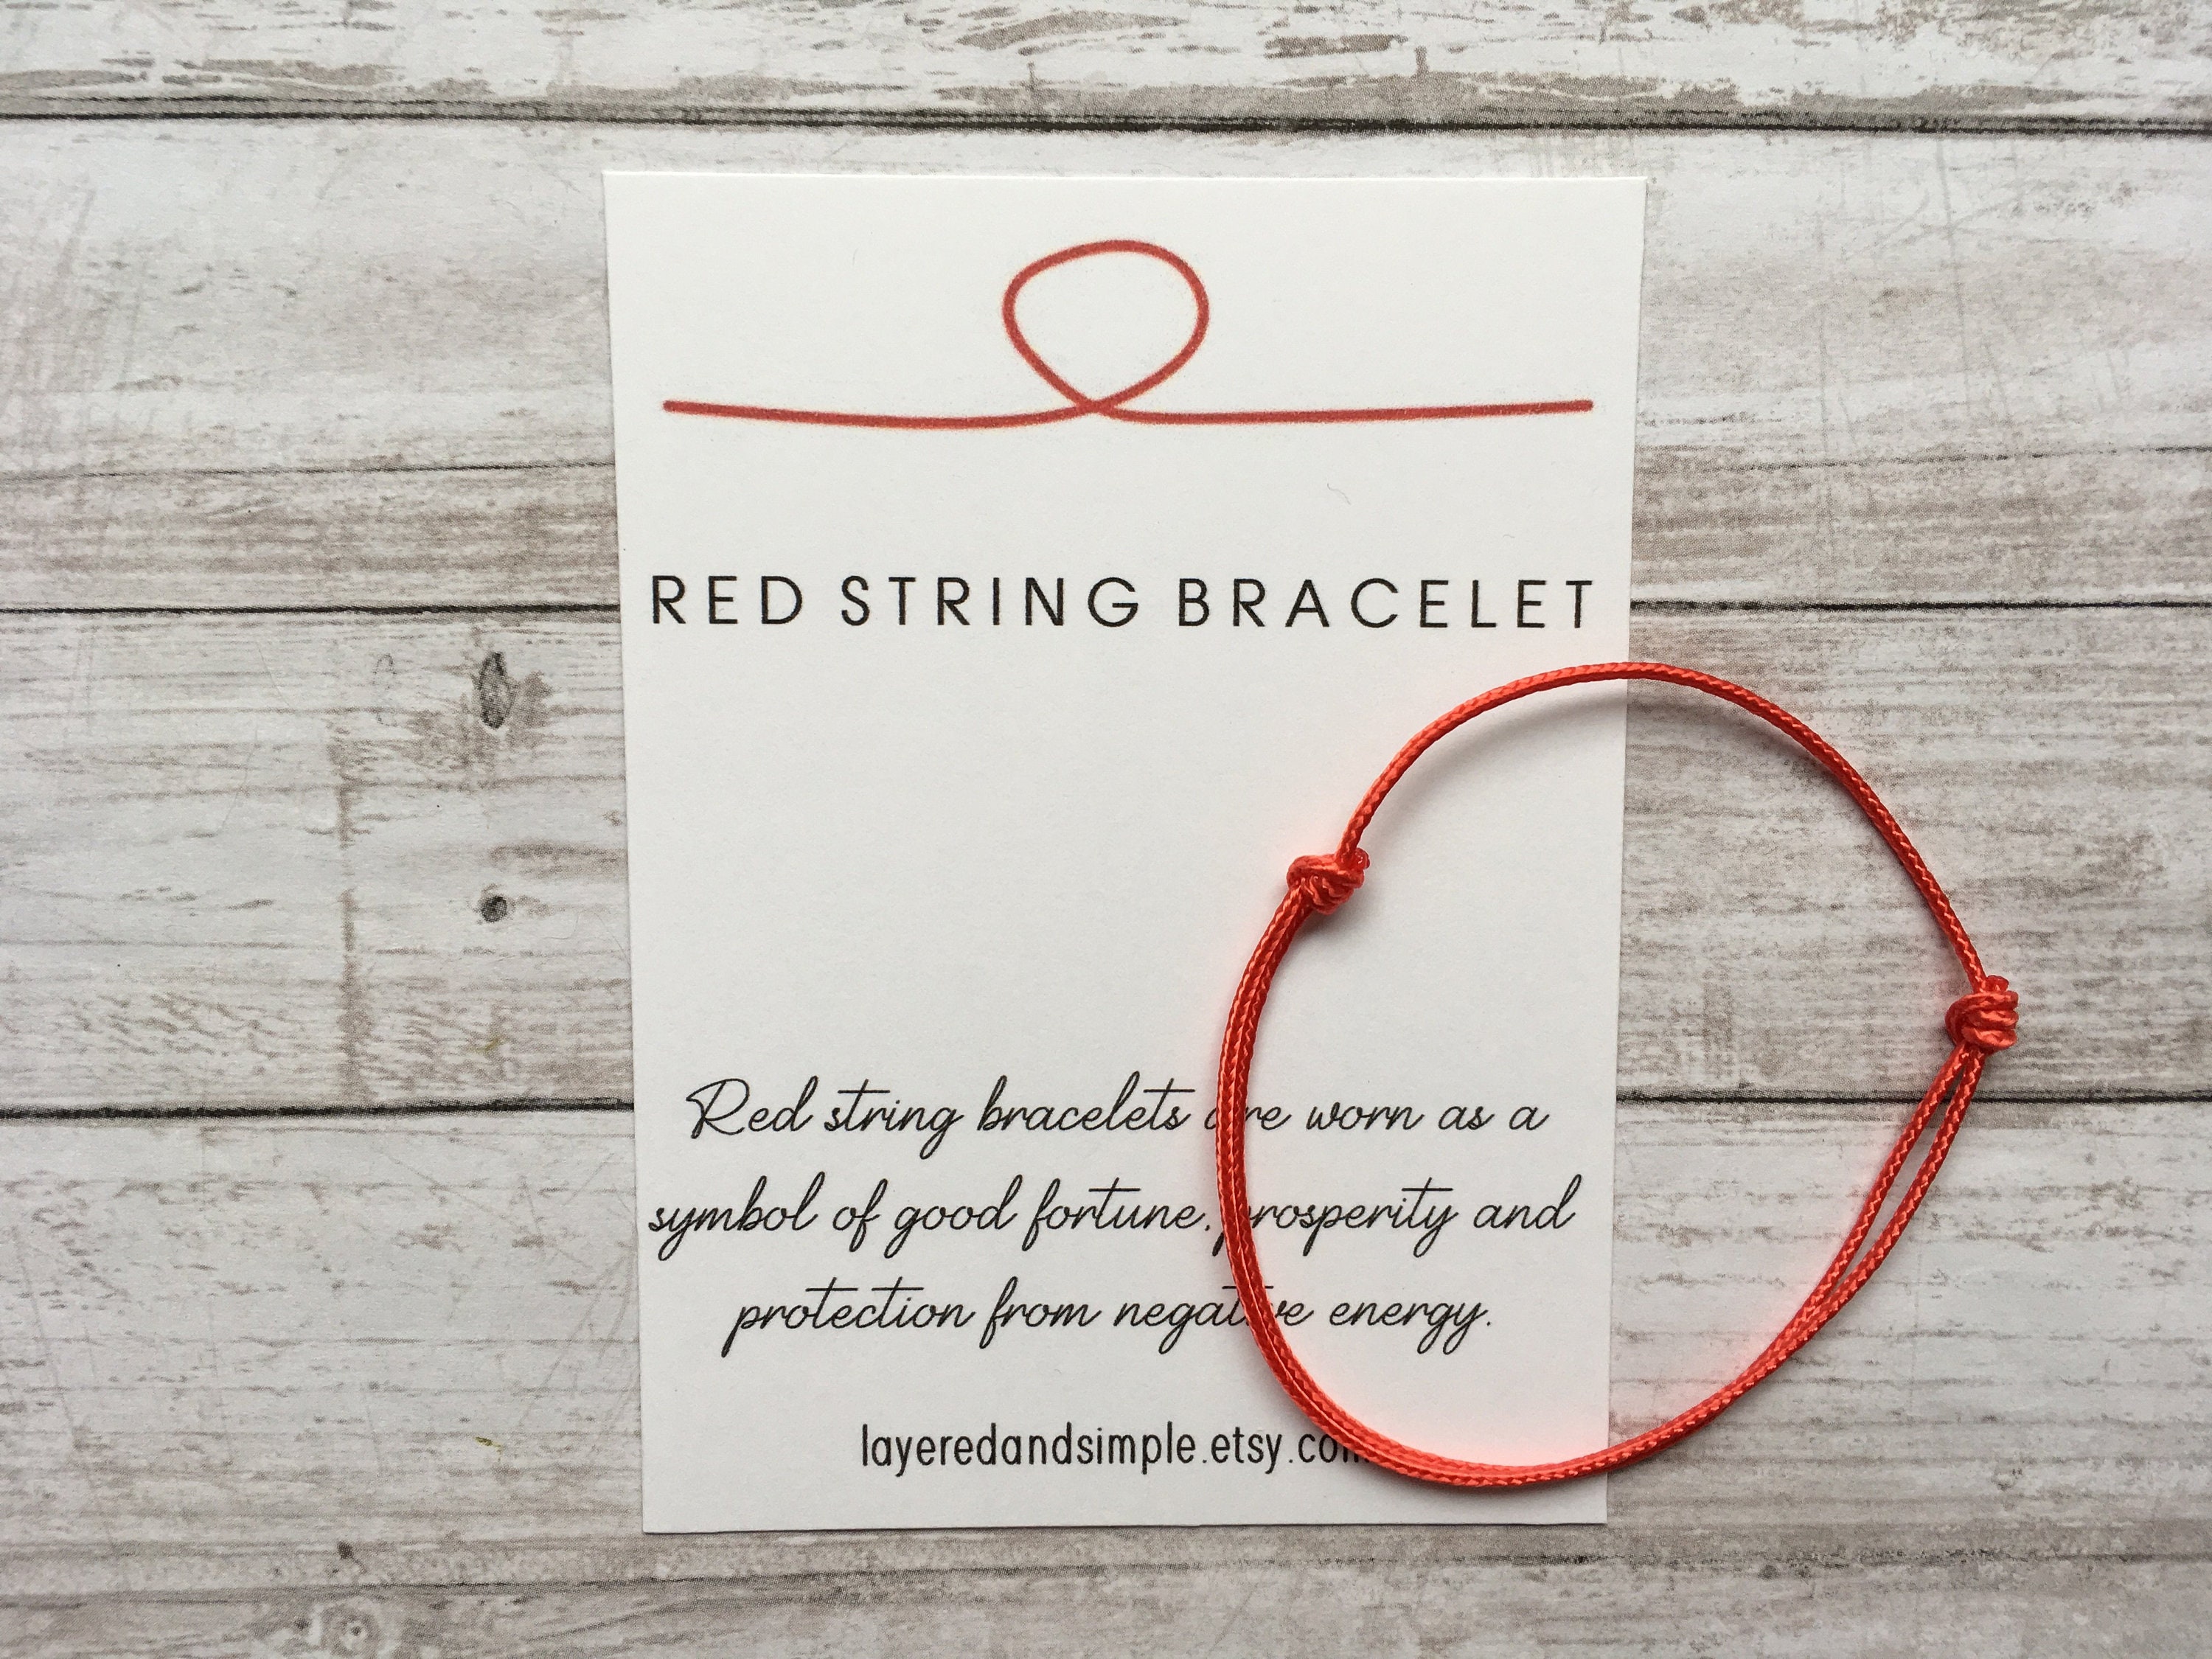 The Red String Pouch (English) – The Kabbalah Store US